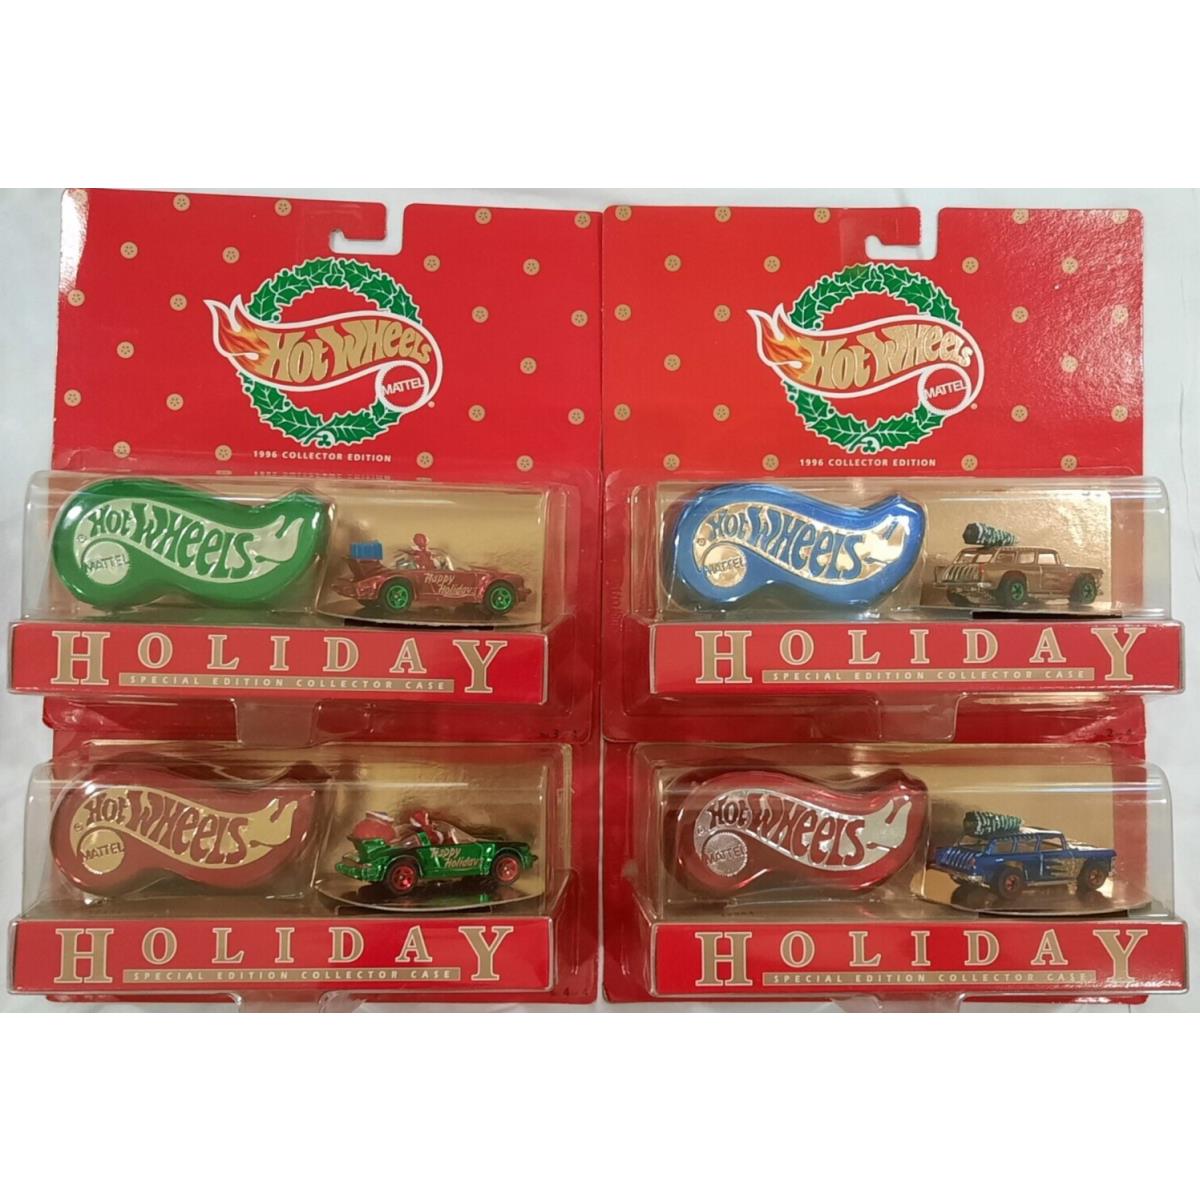 1996 Hot Wheels Christmas Holiday Porsche Nomad 4 Car Set Rare Matching Numbers